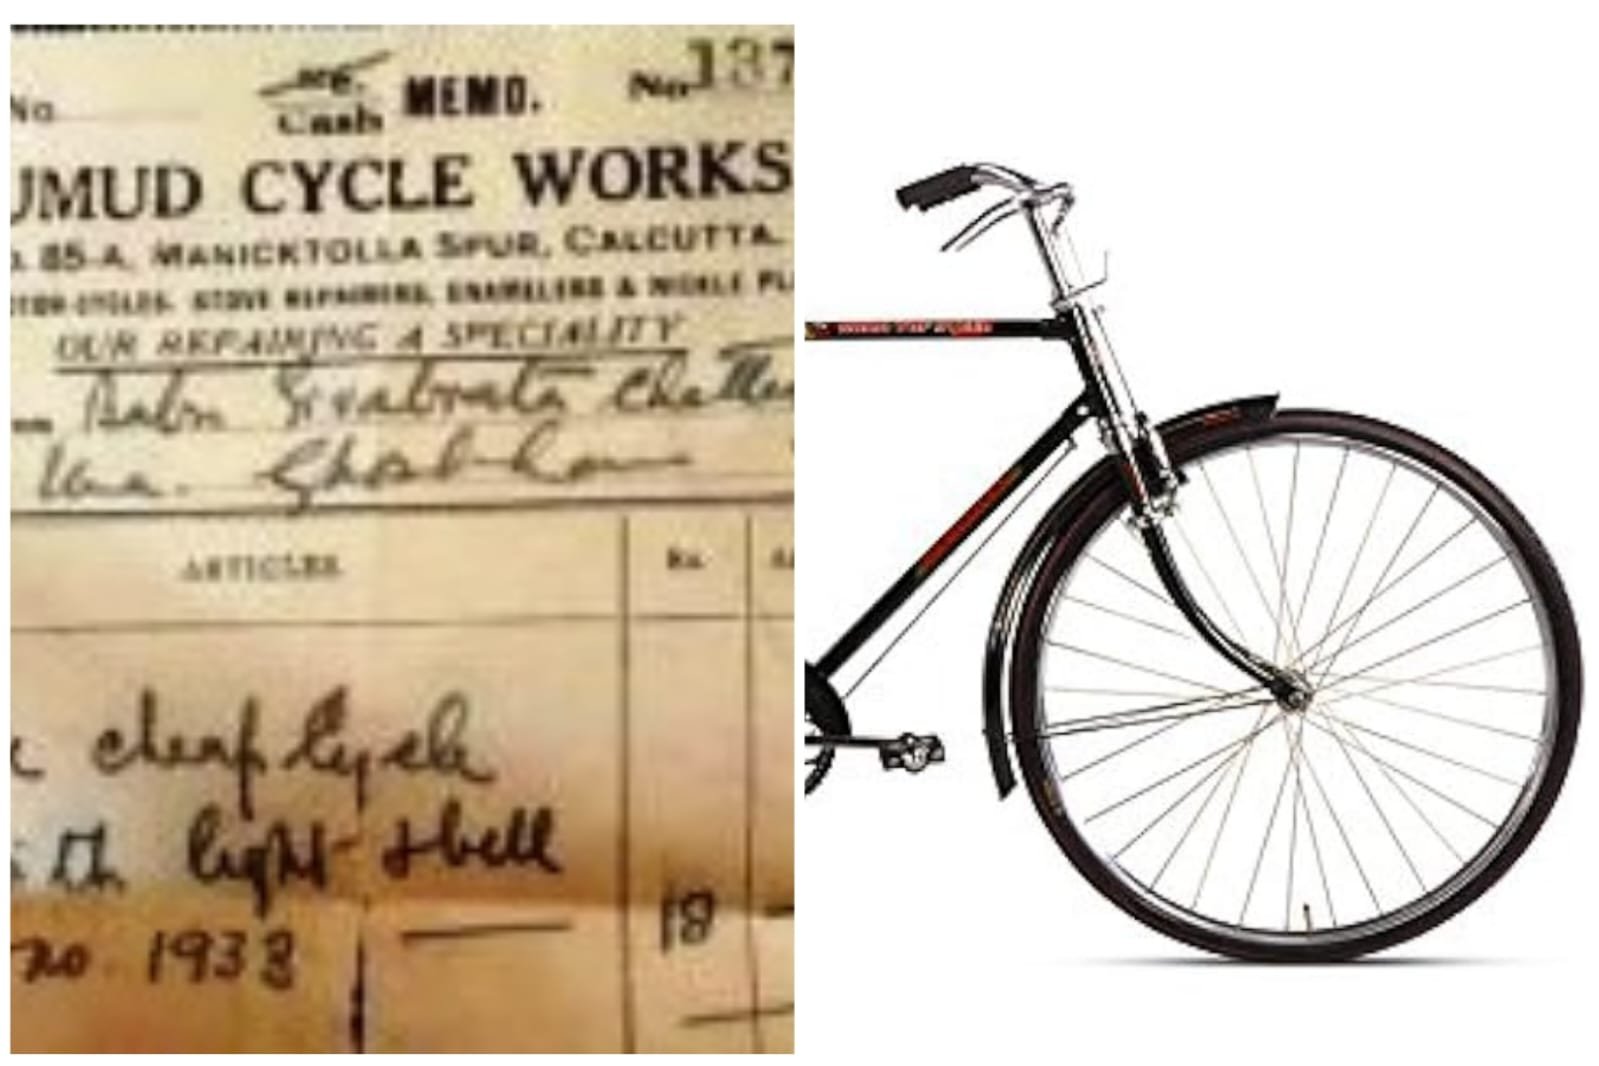 90 years ago, Cycle In 1934 bill was available for a few rupees, goes viral